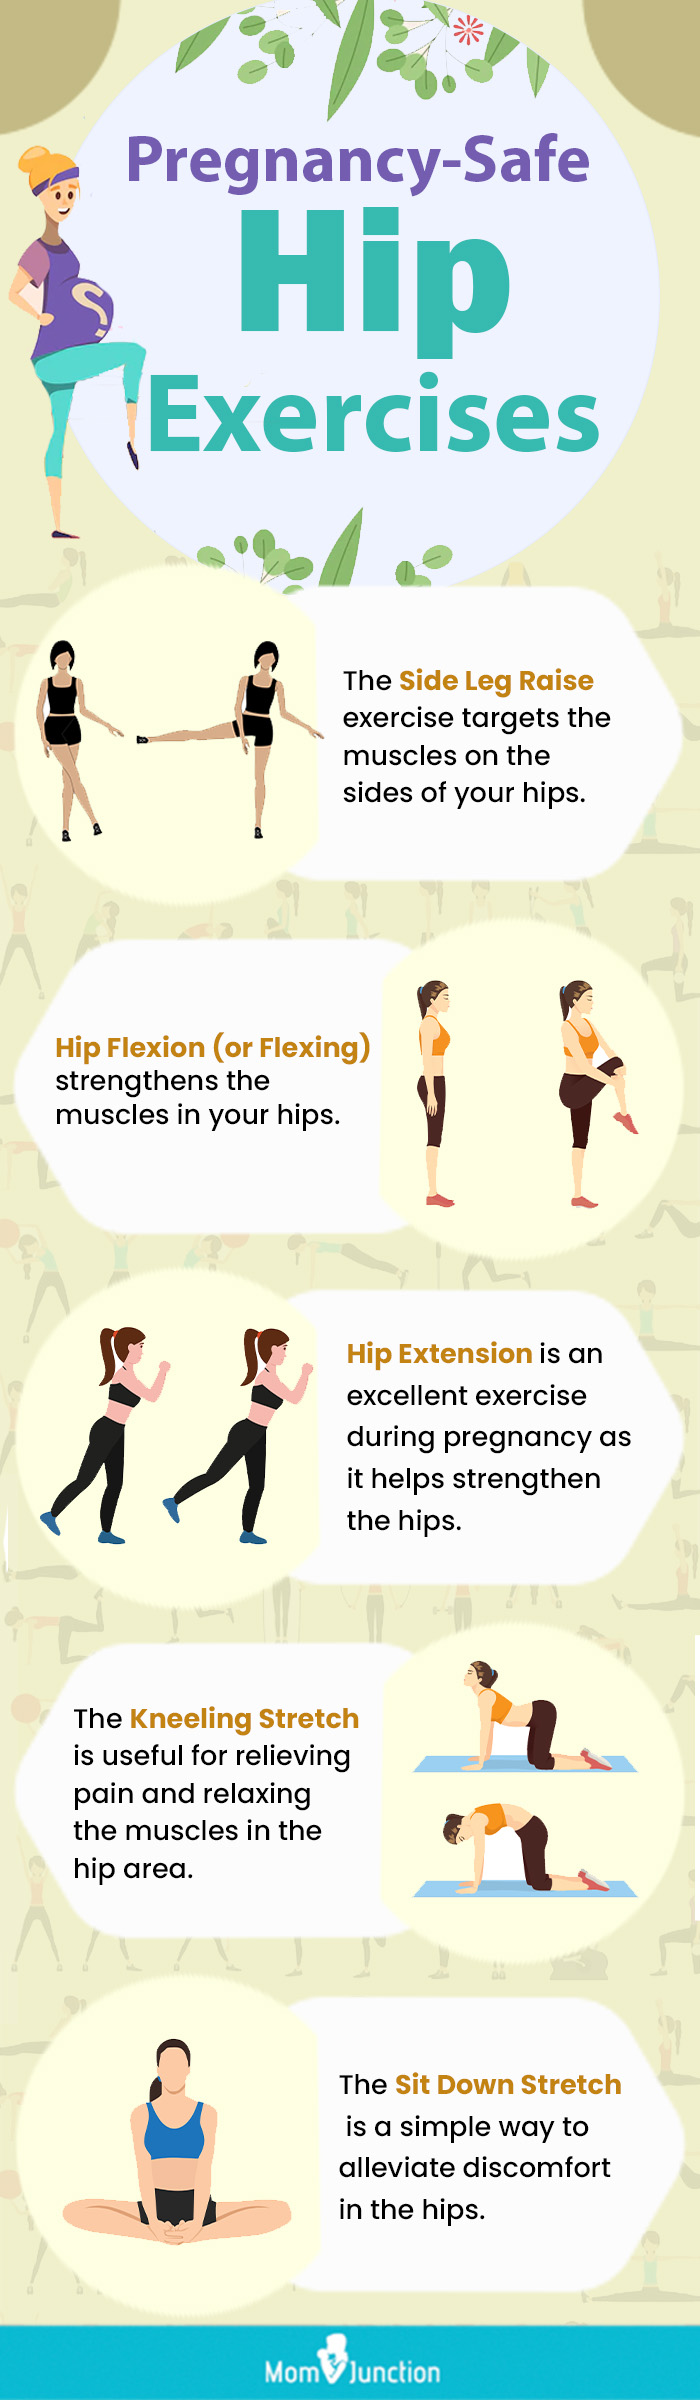 6 Hip Exercises You Can Do During Your Pregnancy